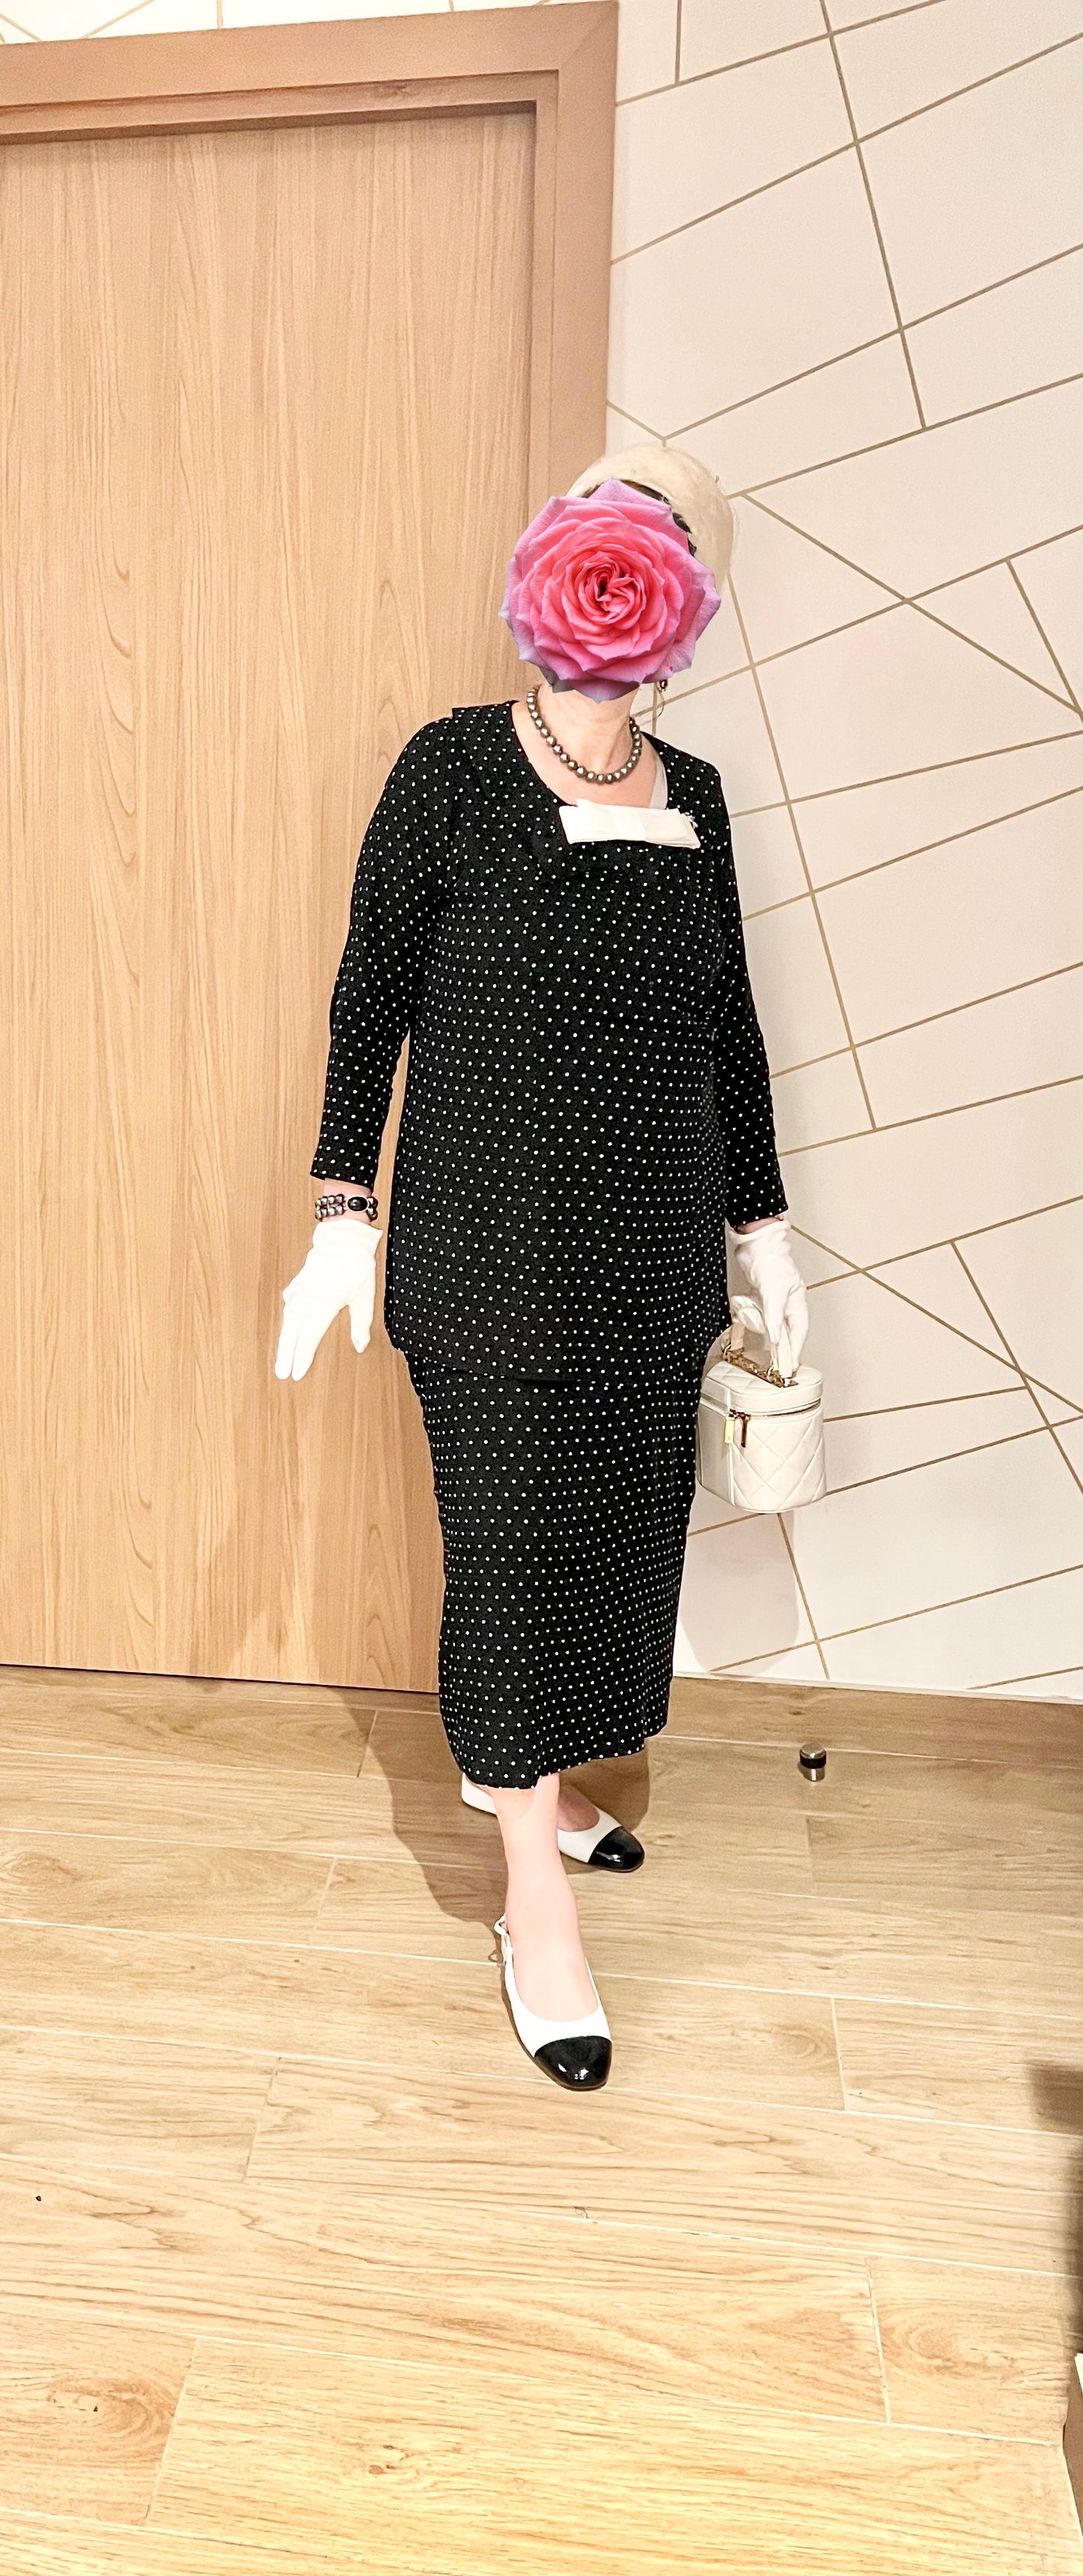 PRE-ORDER NEW: Polka dots skirt suit!